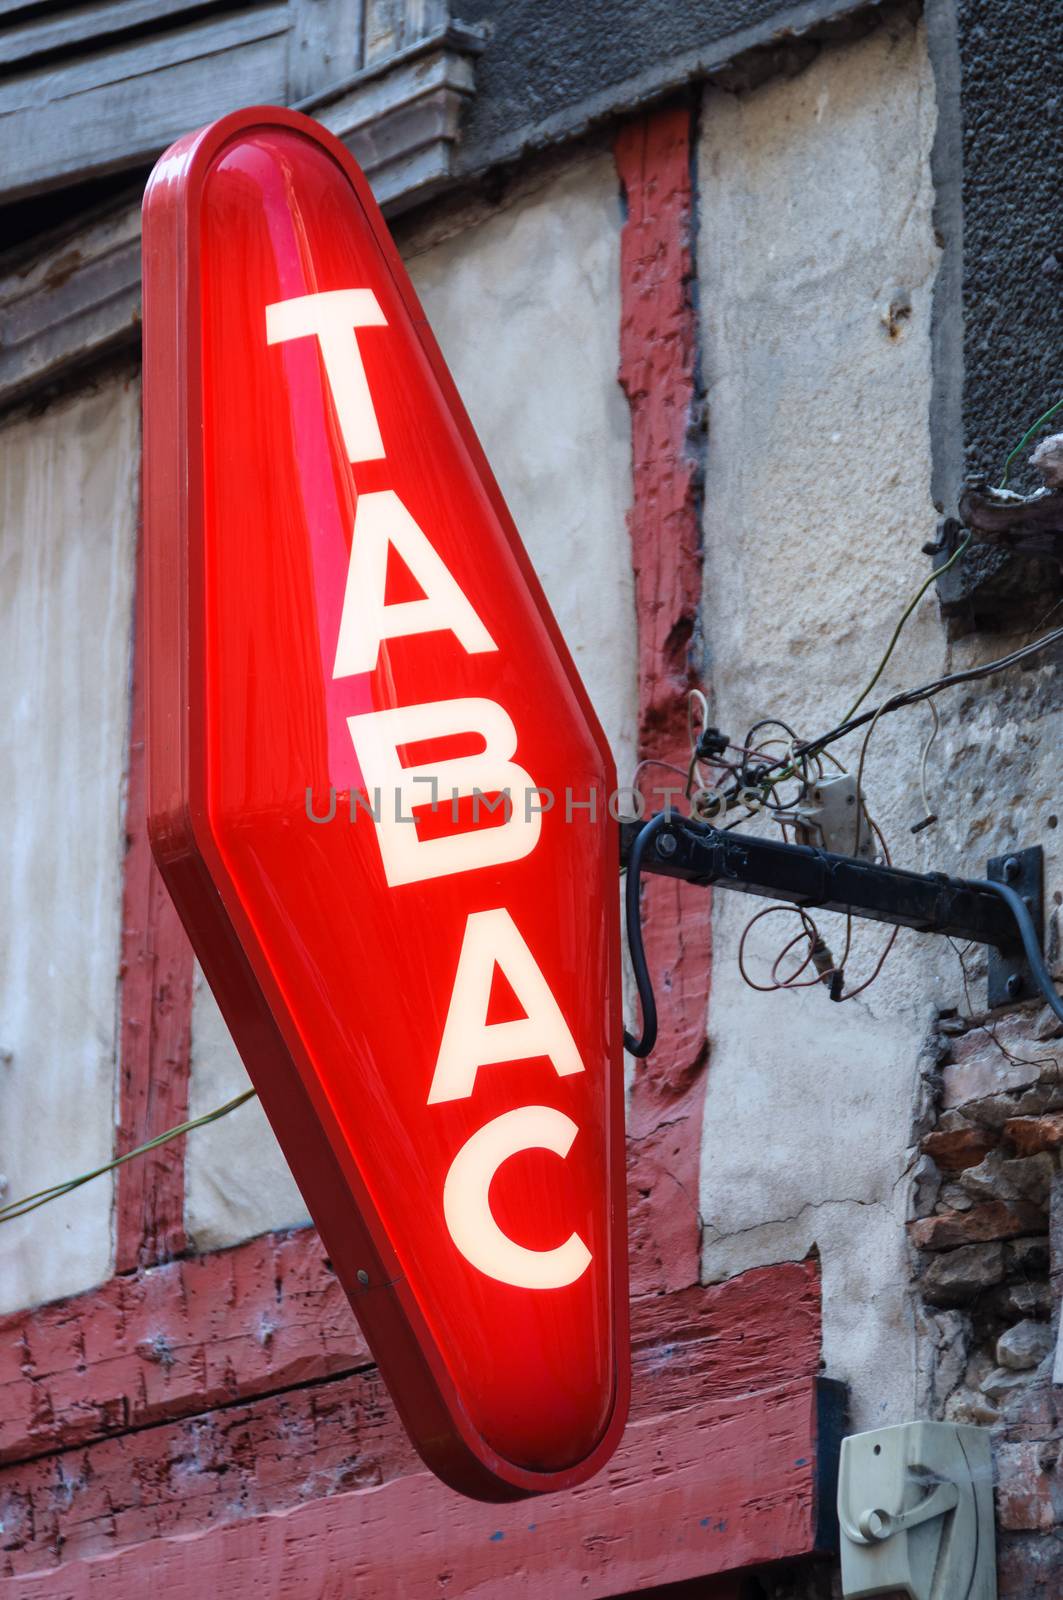 French tobacconist sign